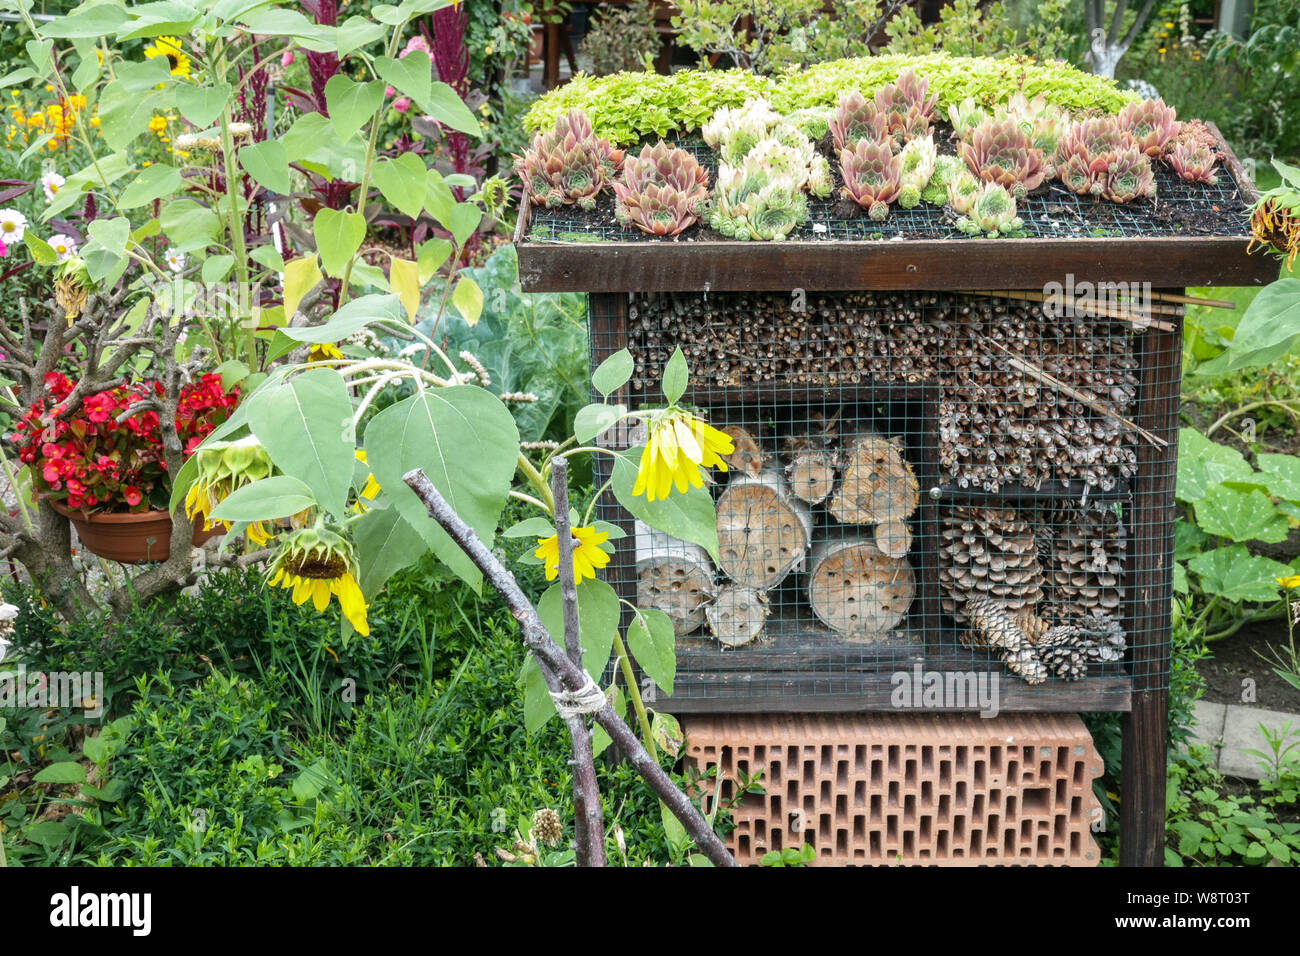 Bee-friendly garden insect hotel, a box made from old cones, tree trunk, bricks and with succulents growing on the roof in a garden bee hotel Stock Photo